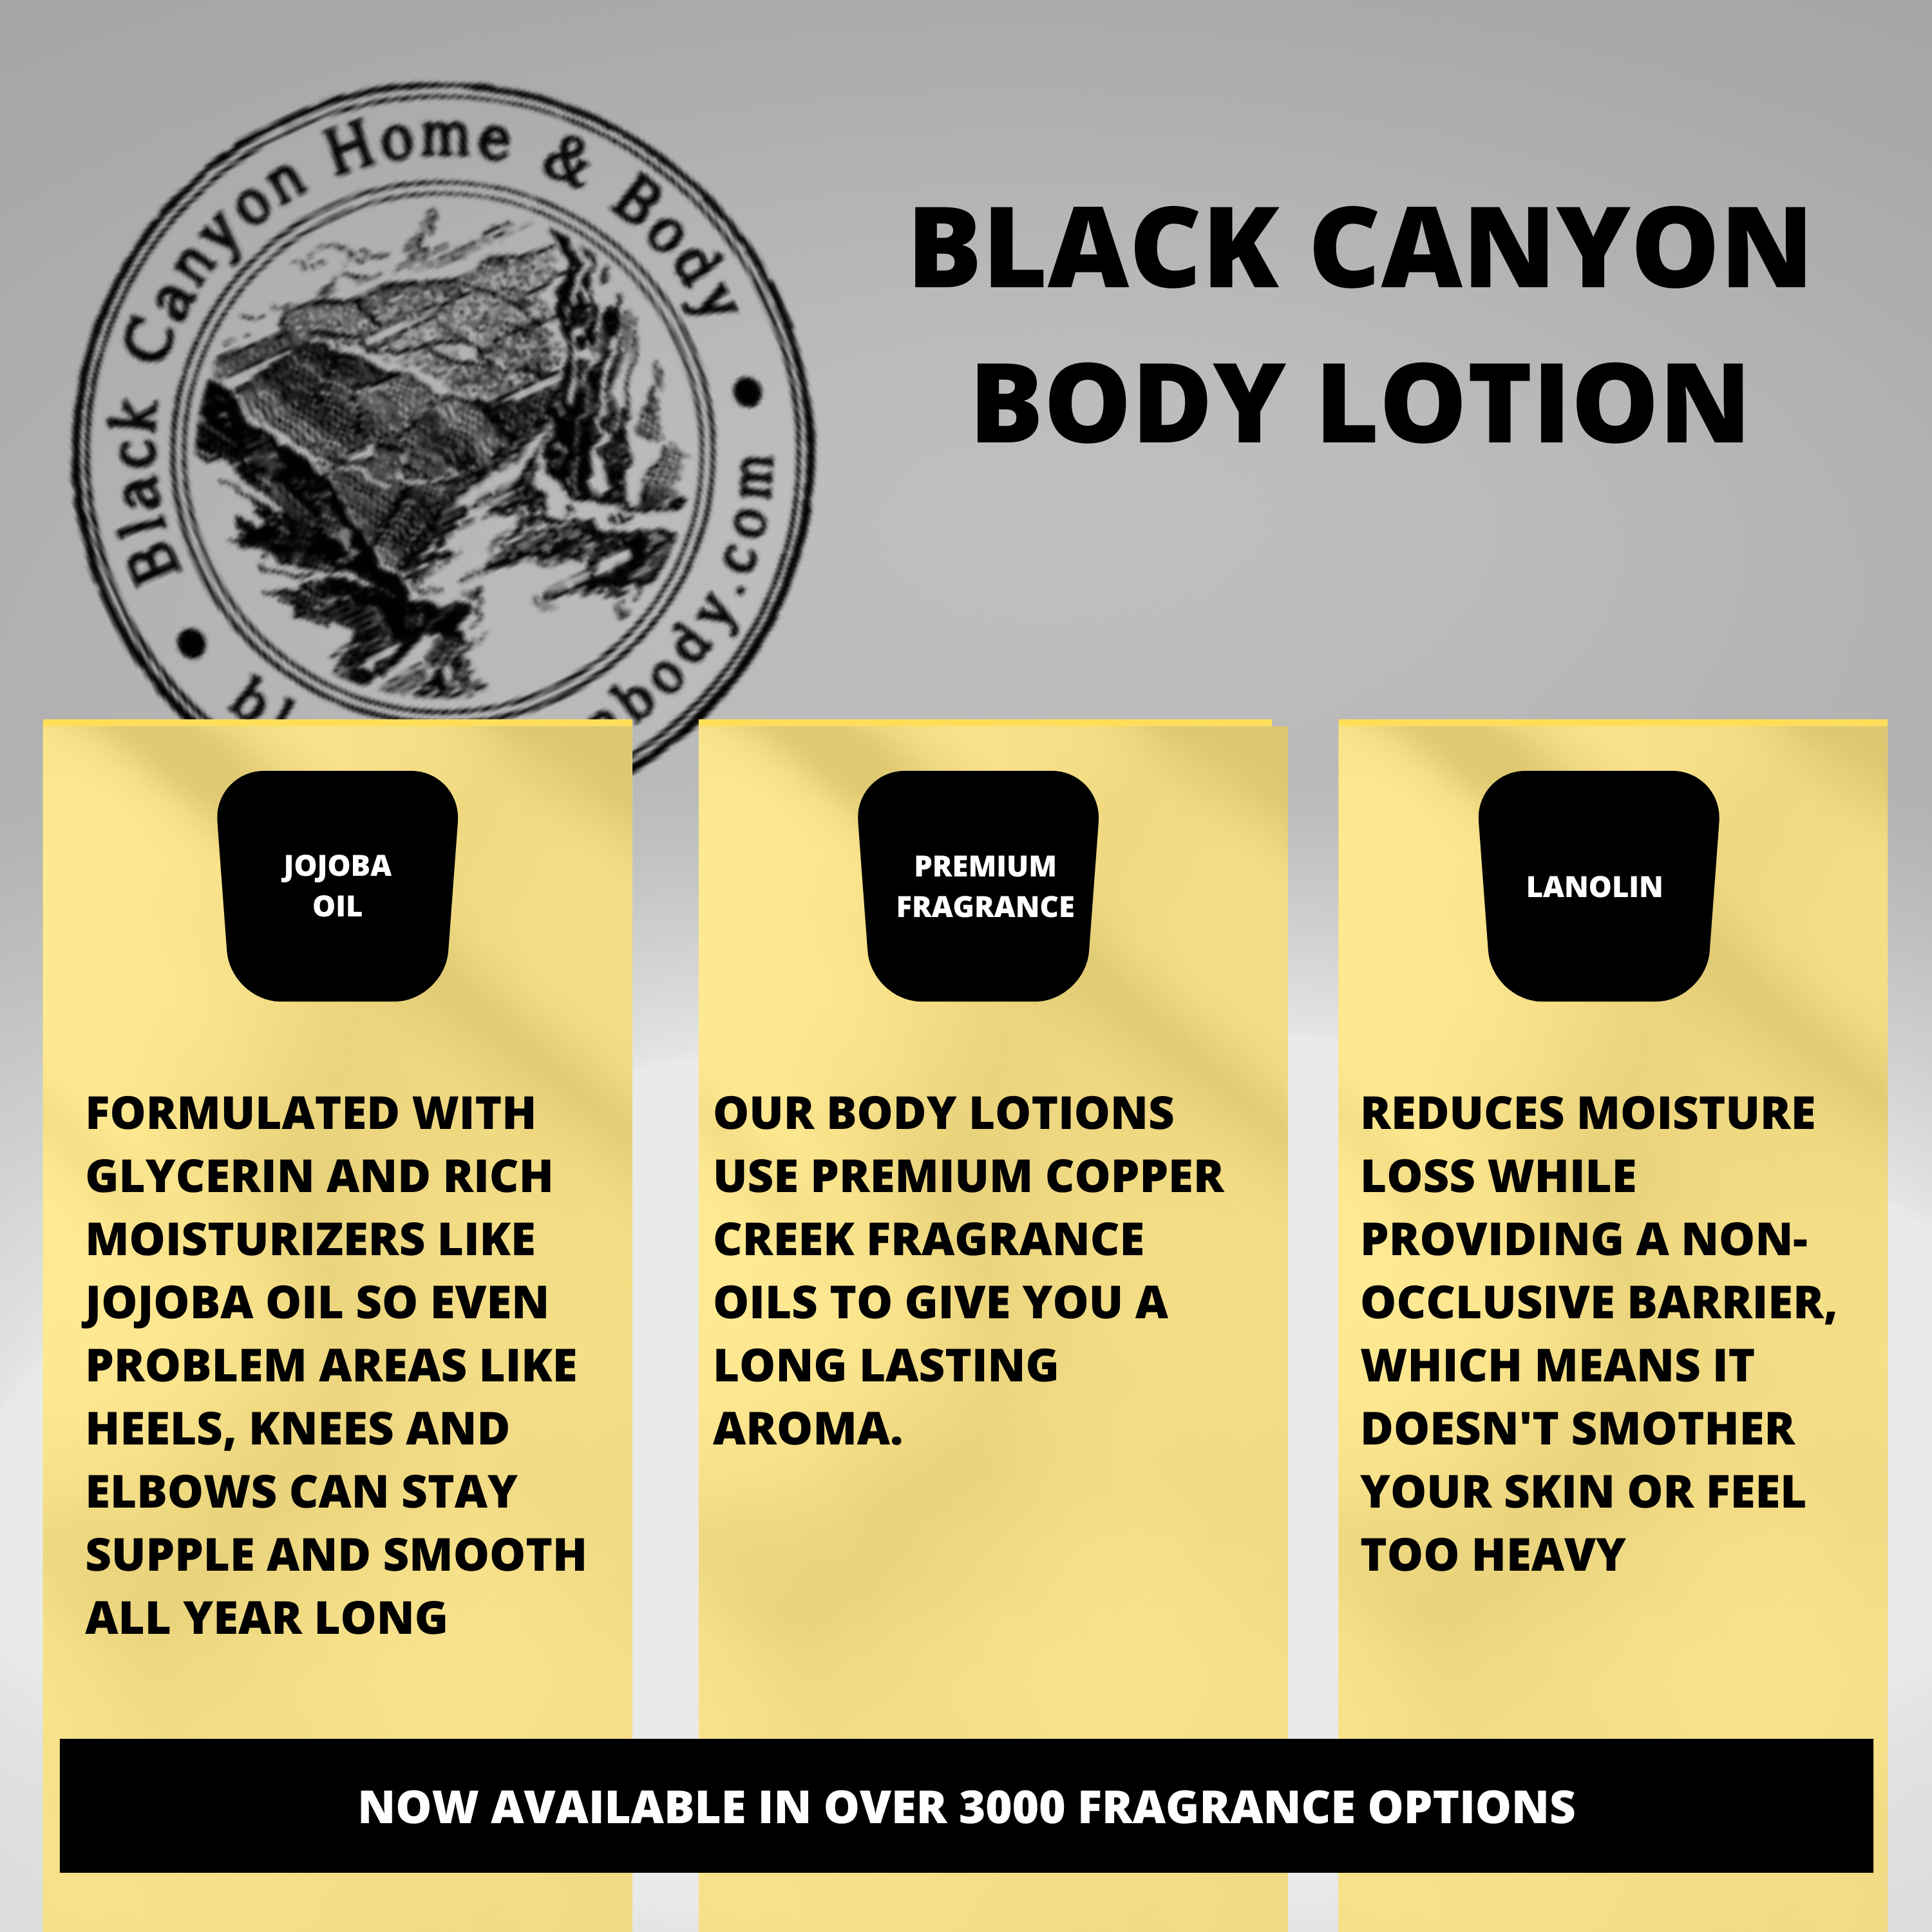 Black Canyon Fig & Coconut Scented Luxury Body Lotion with Lanolin and Jojoba Oil